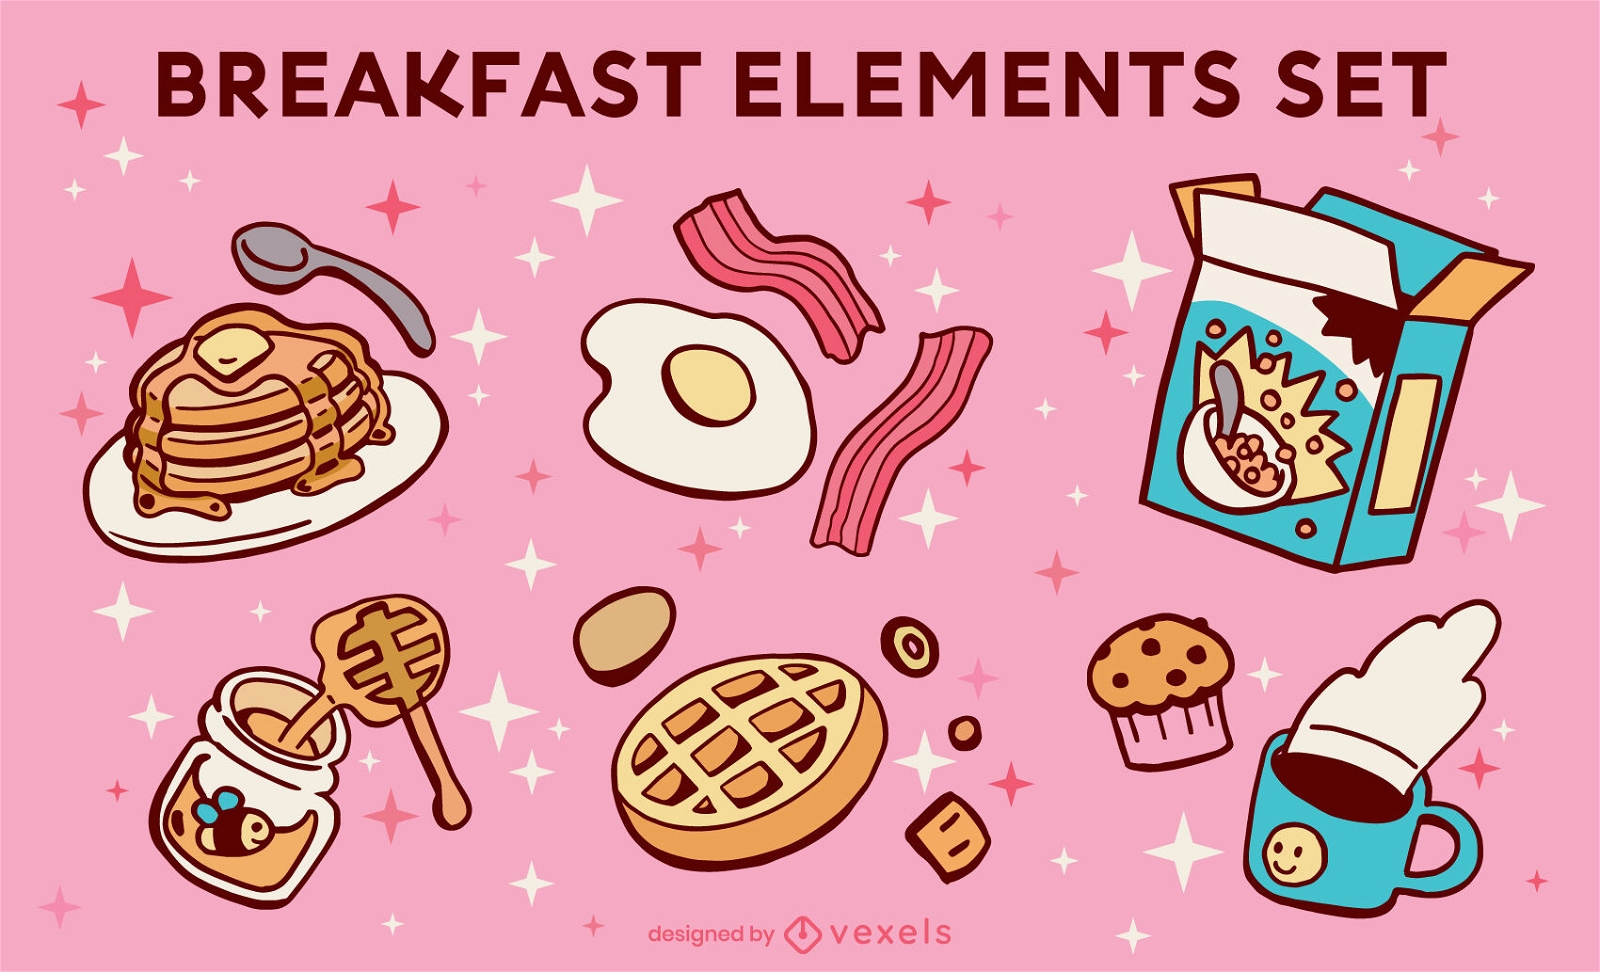 Breakfast food and elements set